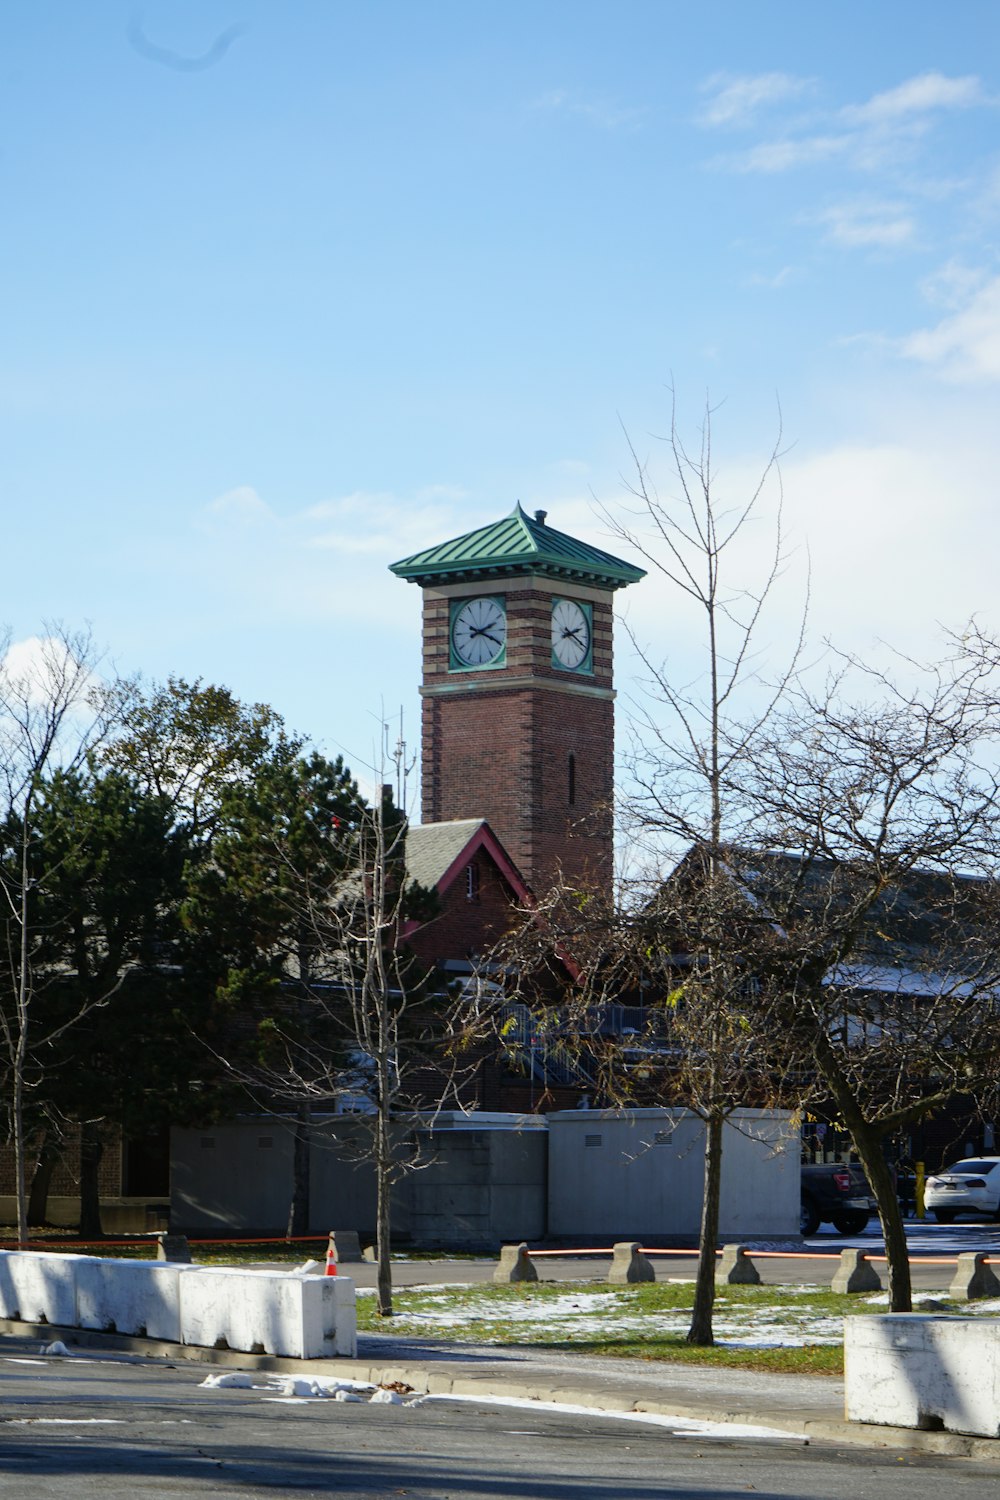 a clock tower on a brick building